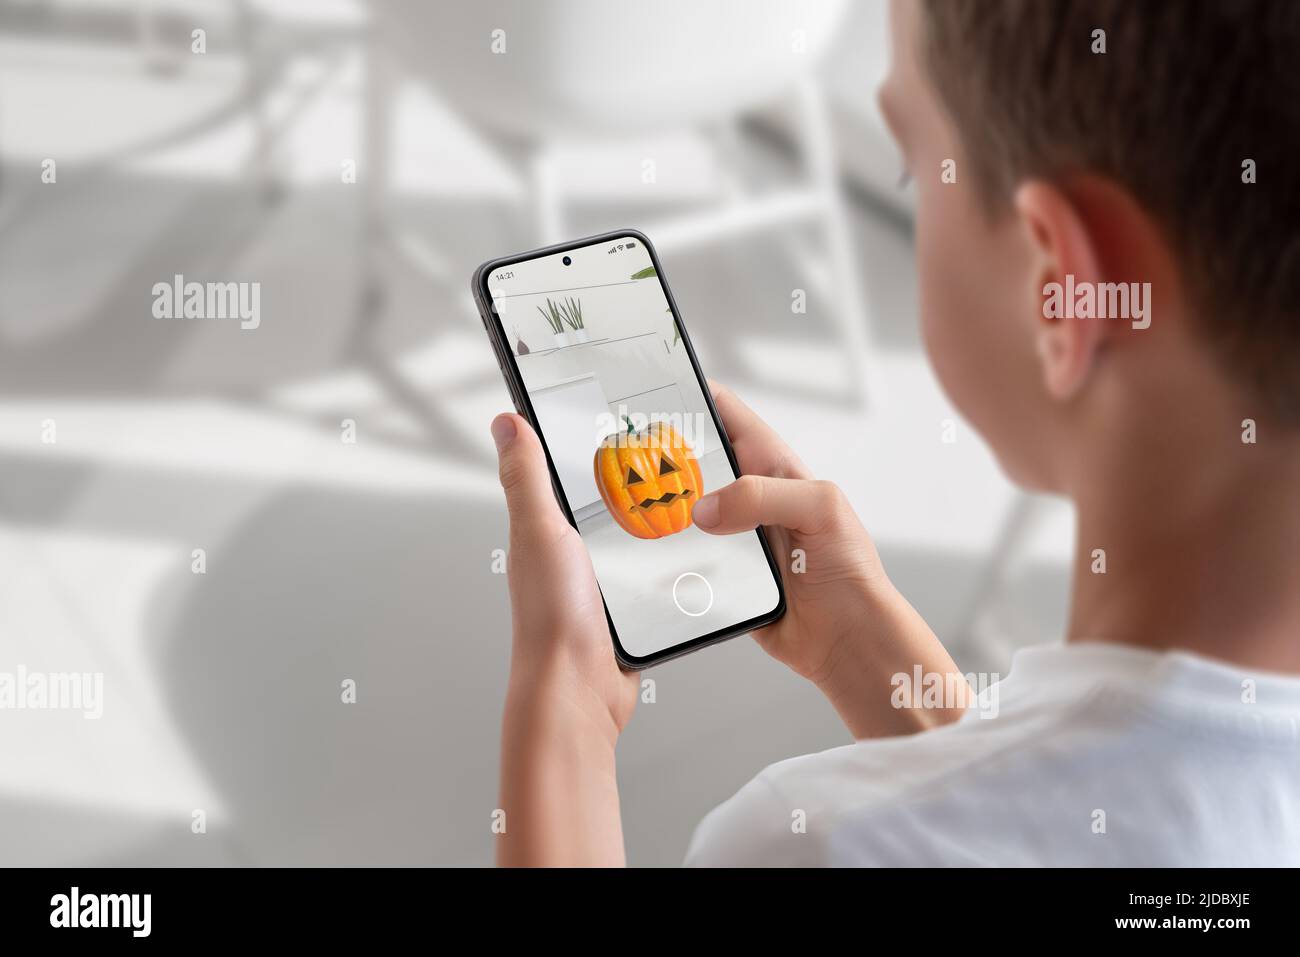 Boy on a mobile phone is playing an augmented reality game. View over shoulder at the phone display. Pumpkin throwing game concept Stock Photo